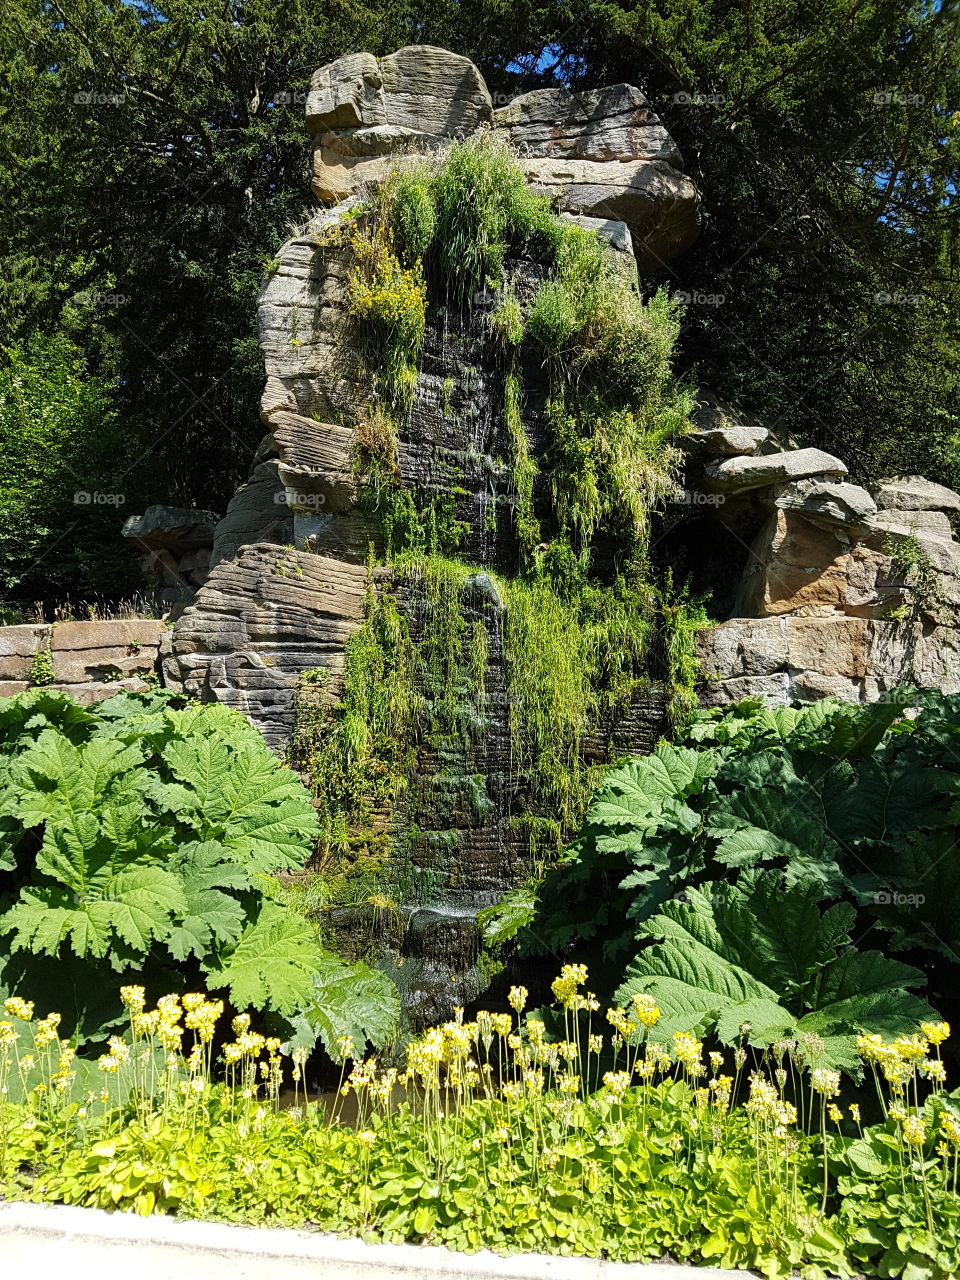 A mossy waterfall in the grounds of a country house.